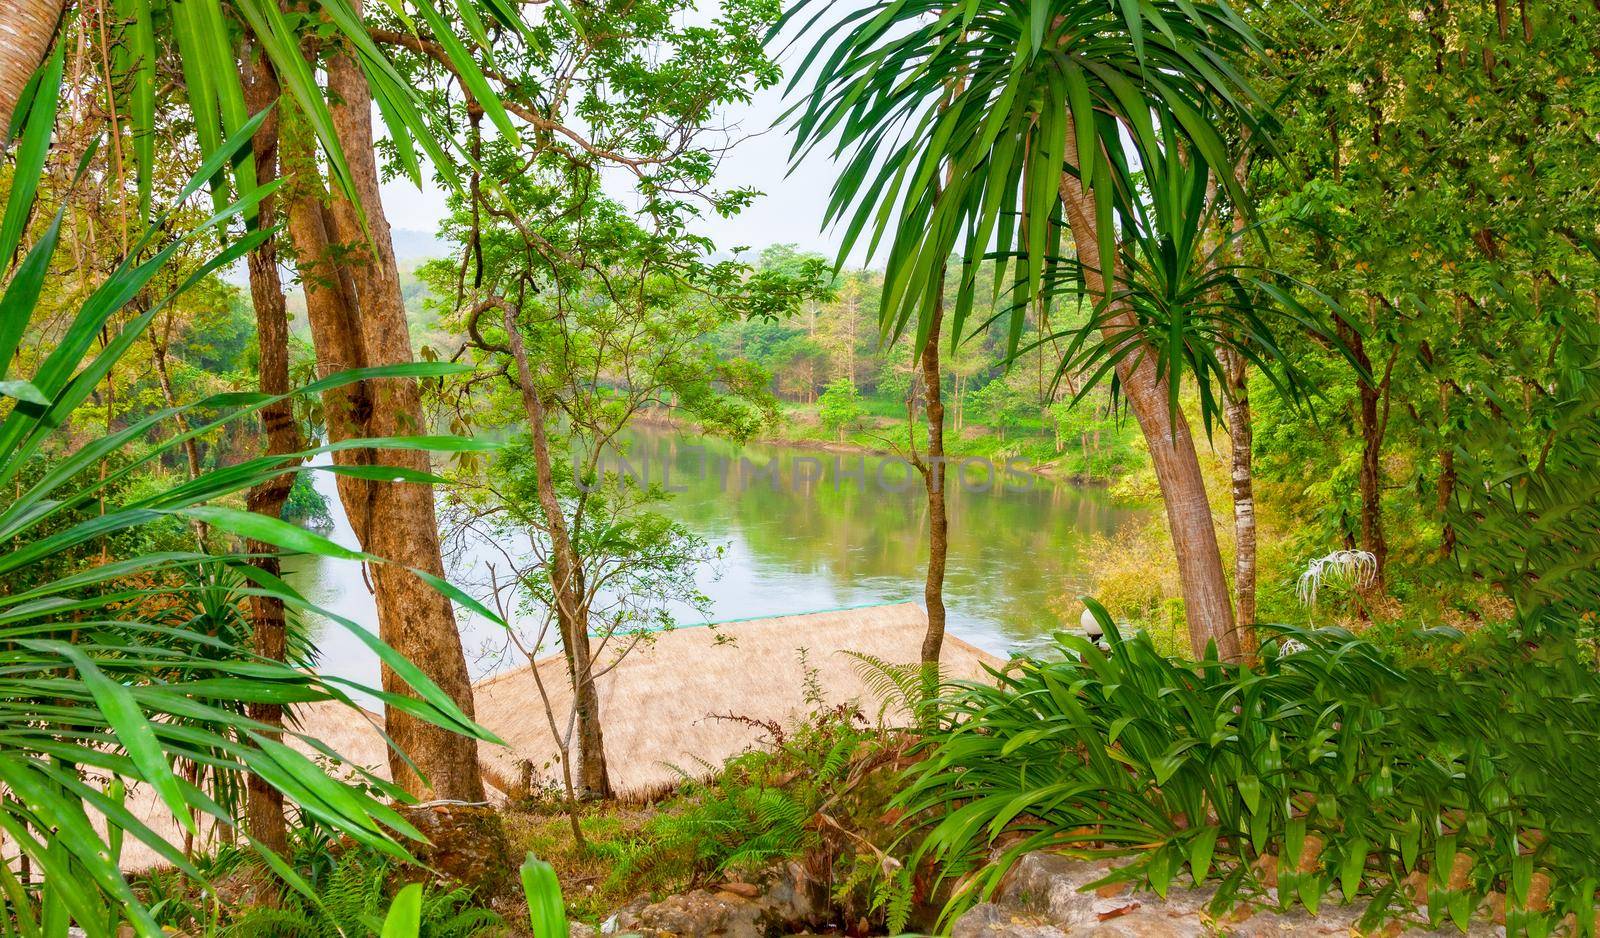 The view from the shore through the palm trees on the beautiful green river. Valley Green River Kwai, Kanchanaburi, Thailand.